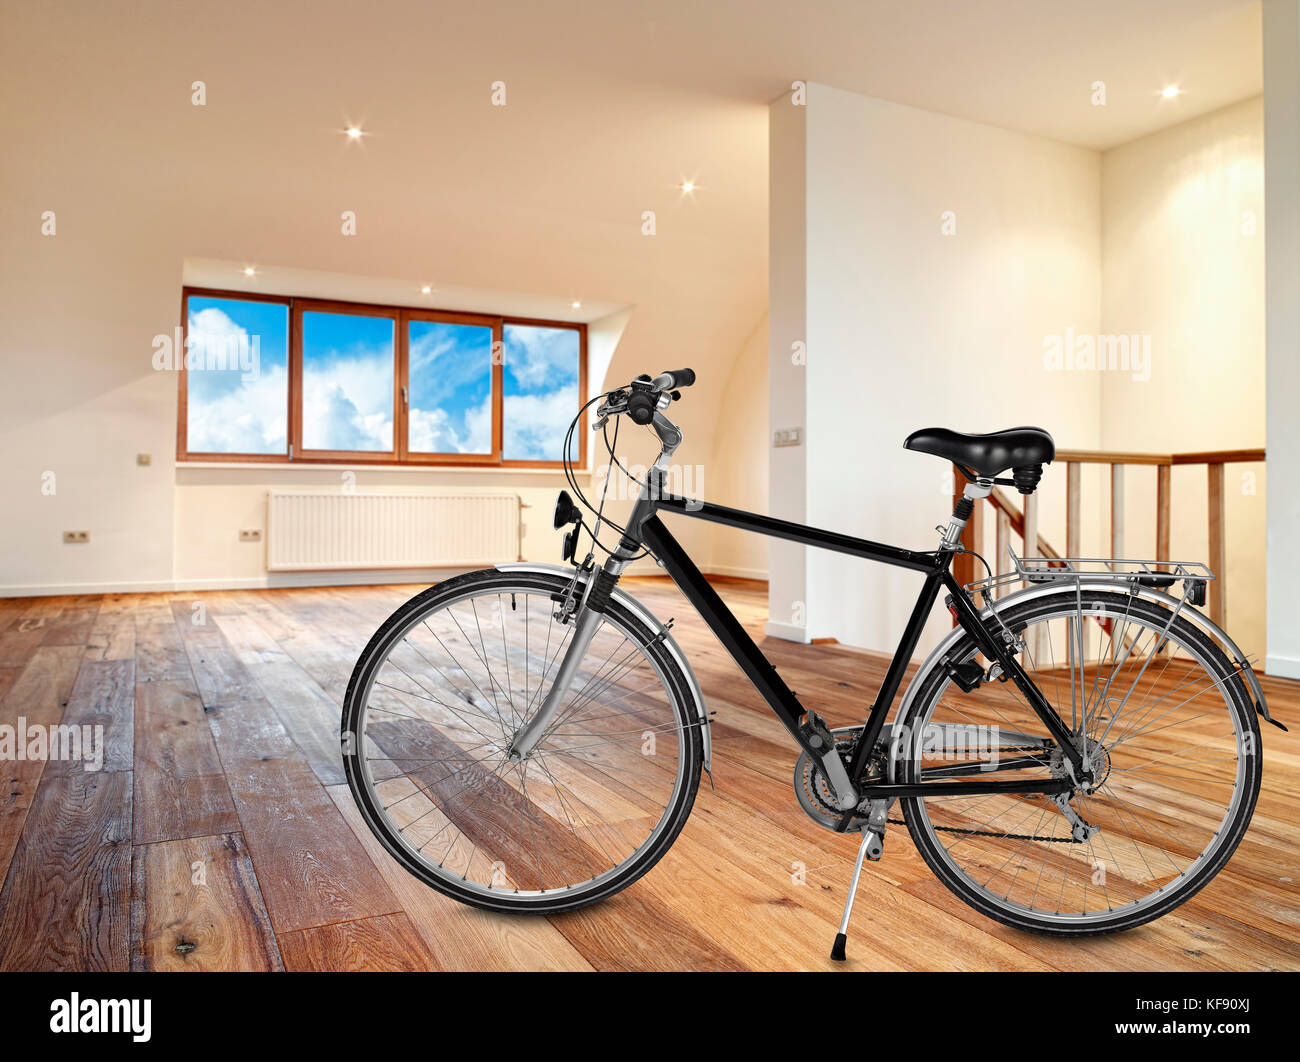 Modern interior with wooden floor and Bike in foreground Stock Photo